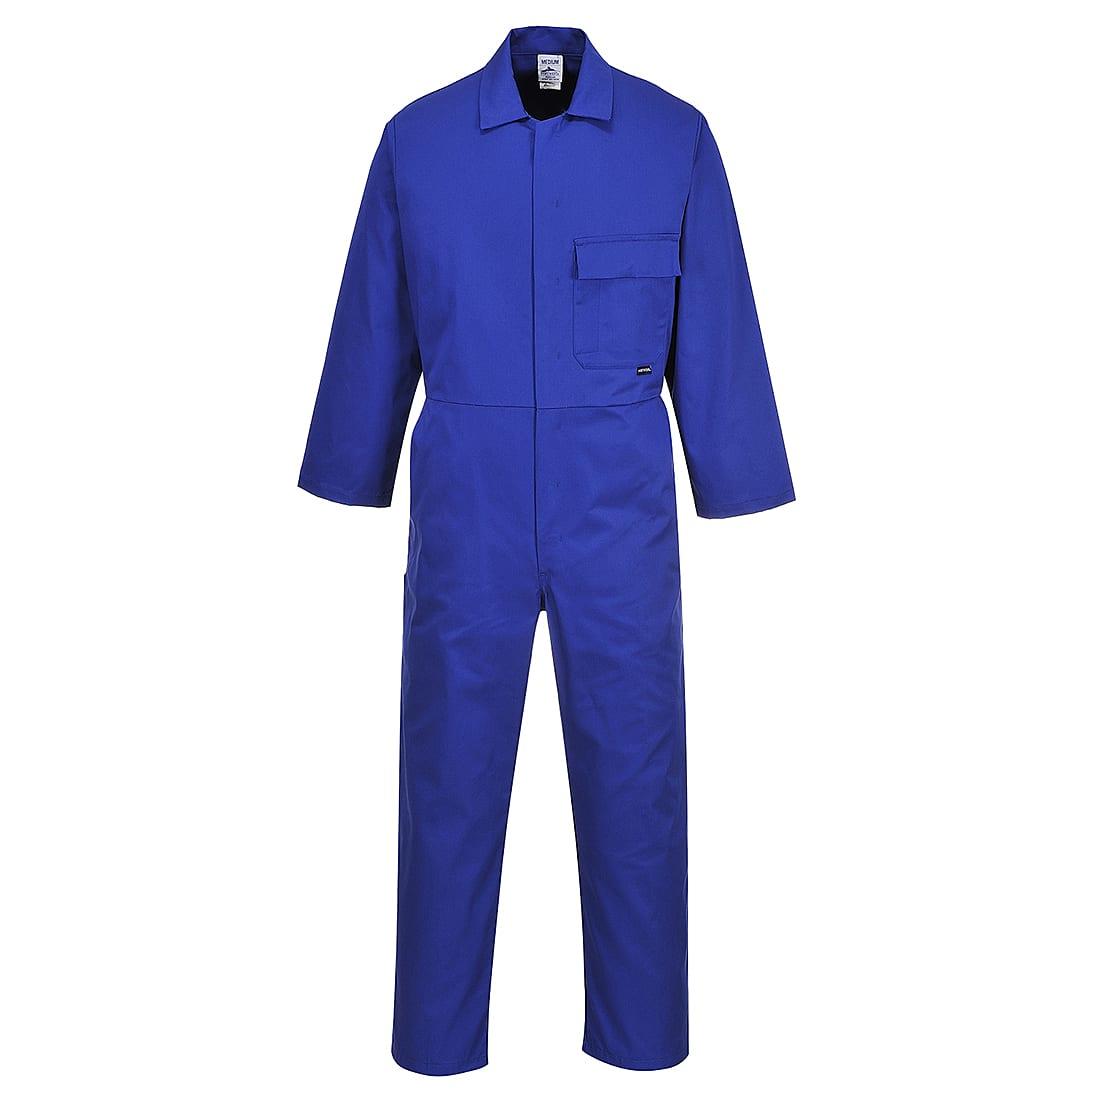 Portwest C802 Standard Coverall in Royal Blue (Product Code: C802)